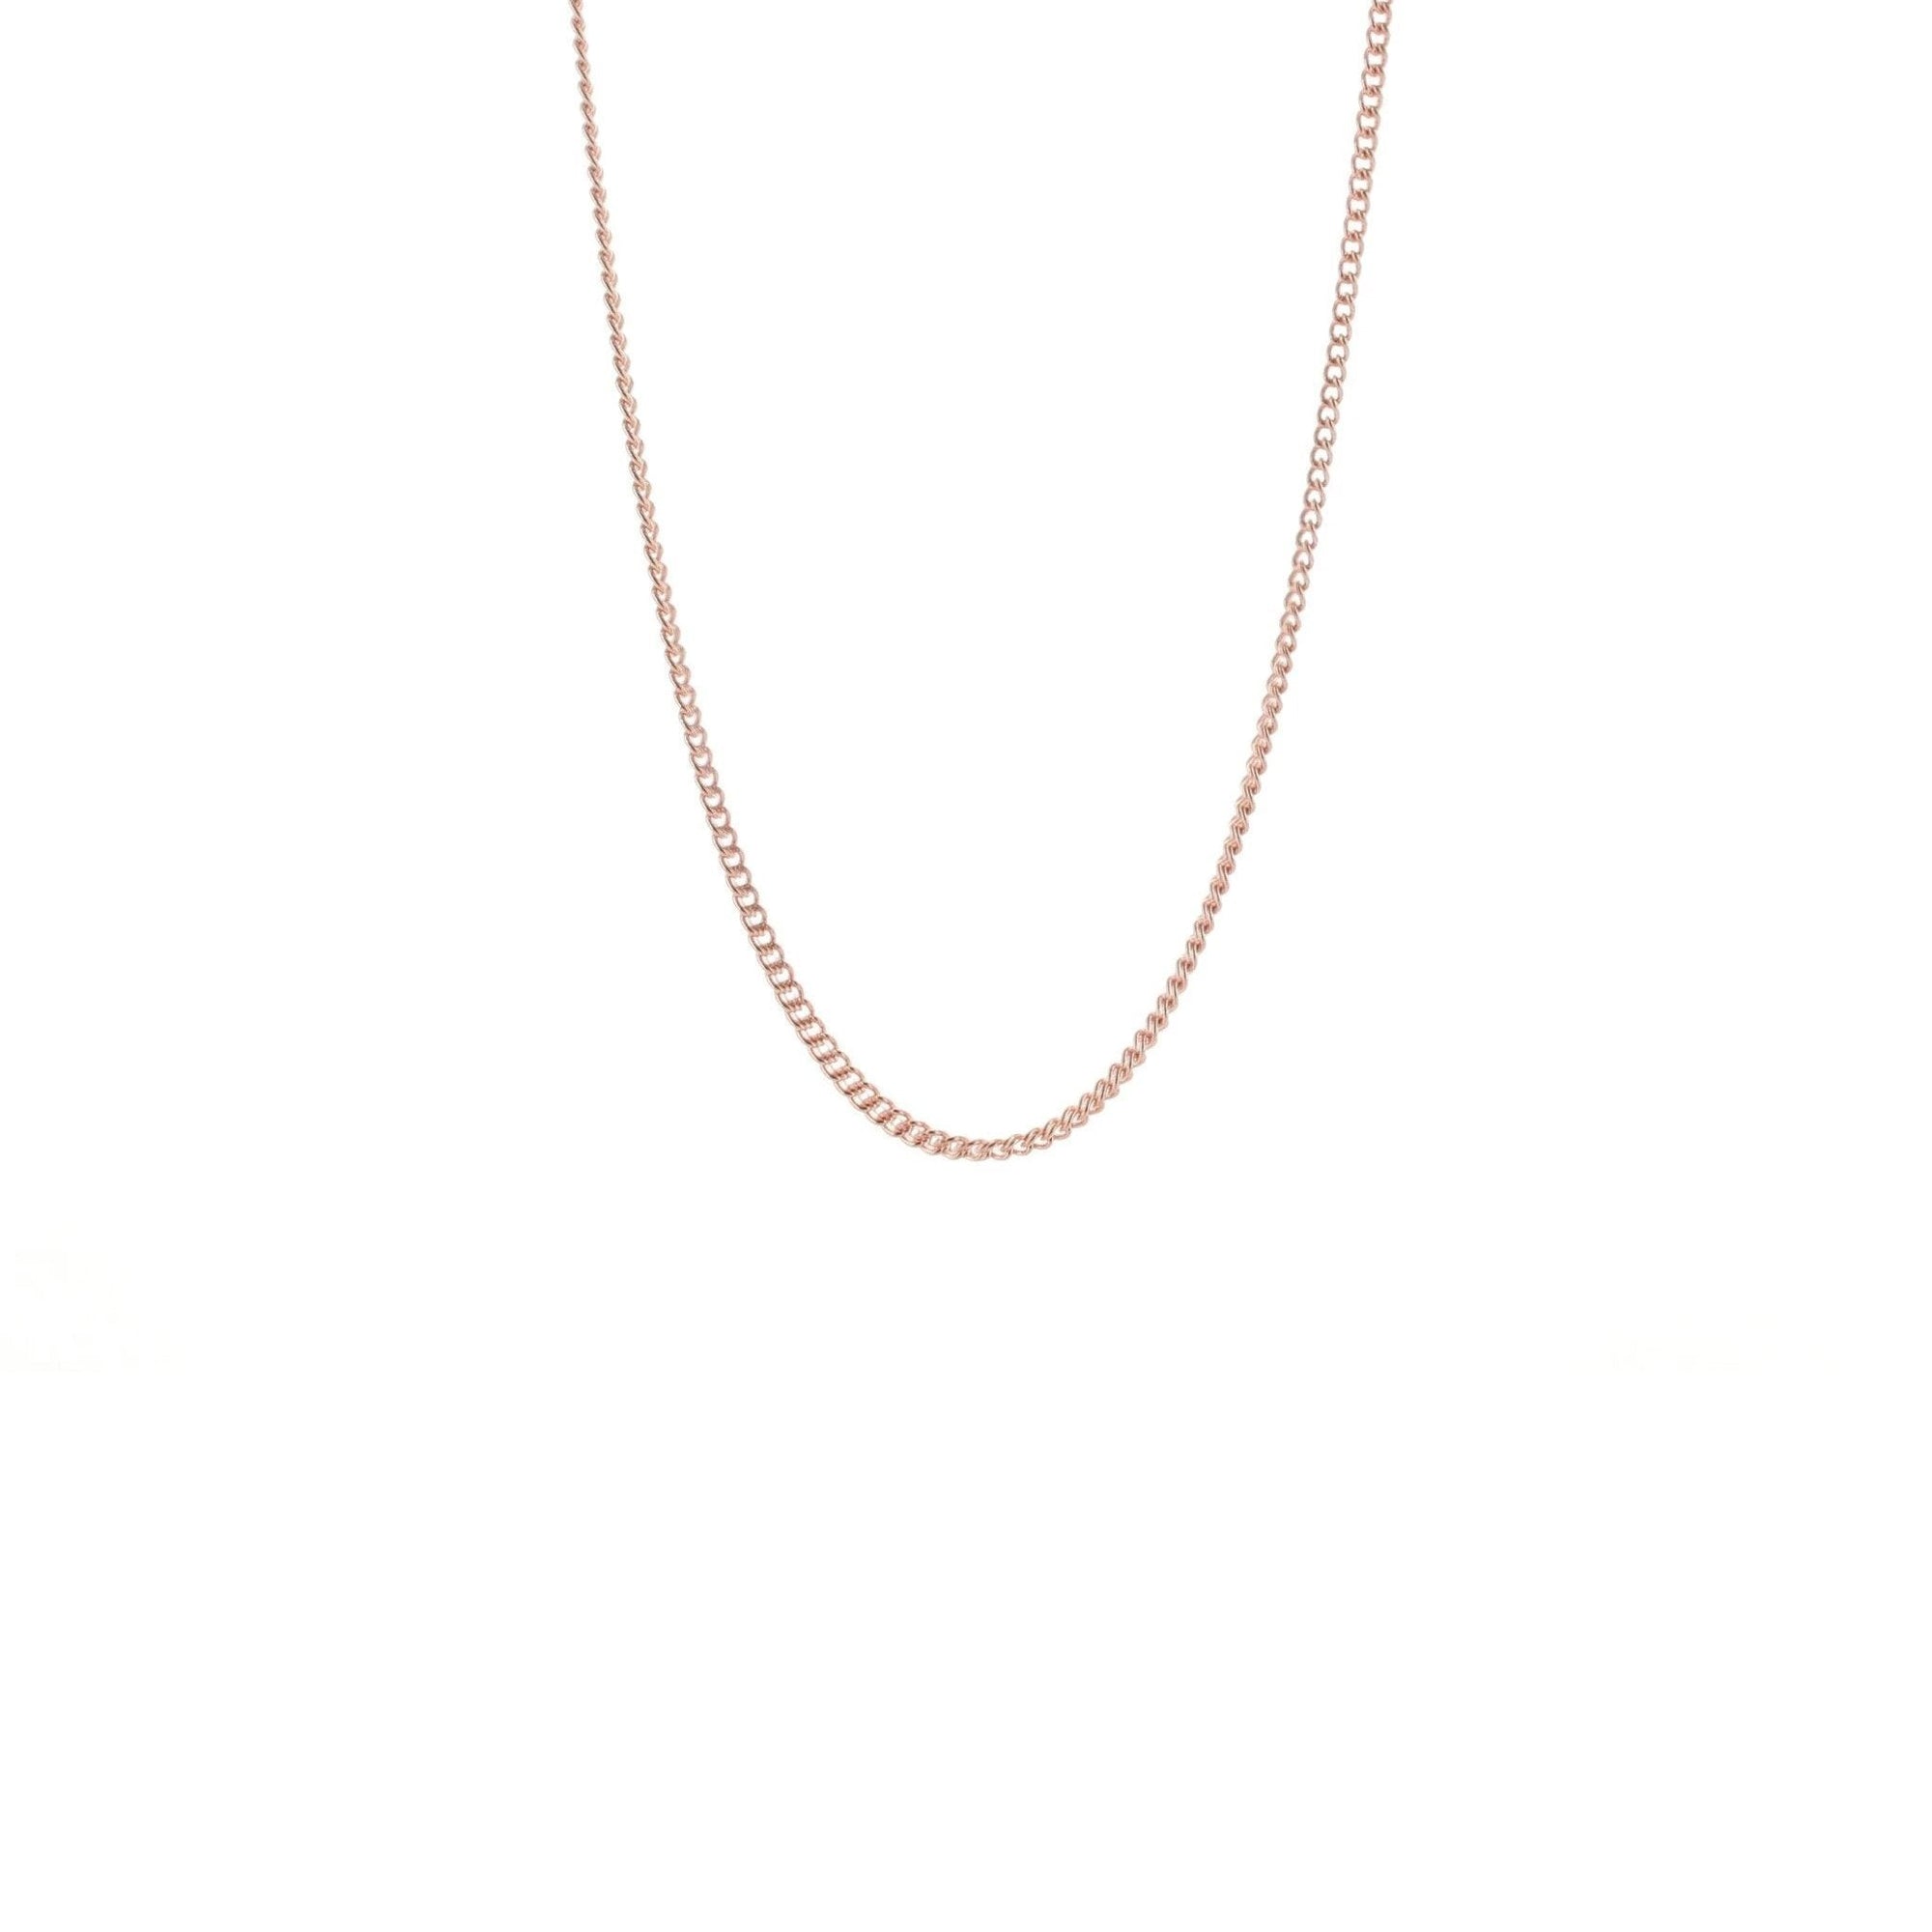 CHARMING 14-17" SHORT NECKLACE - ROSE GOLD - SO PRETTY CARA COTTER